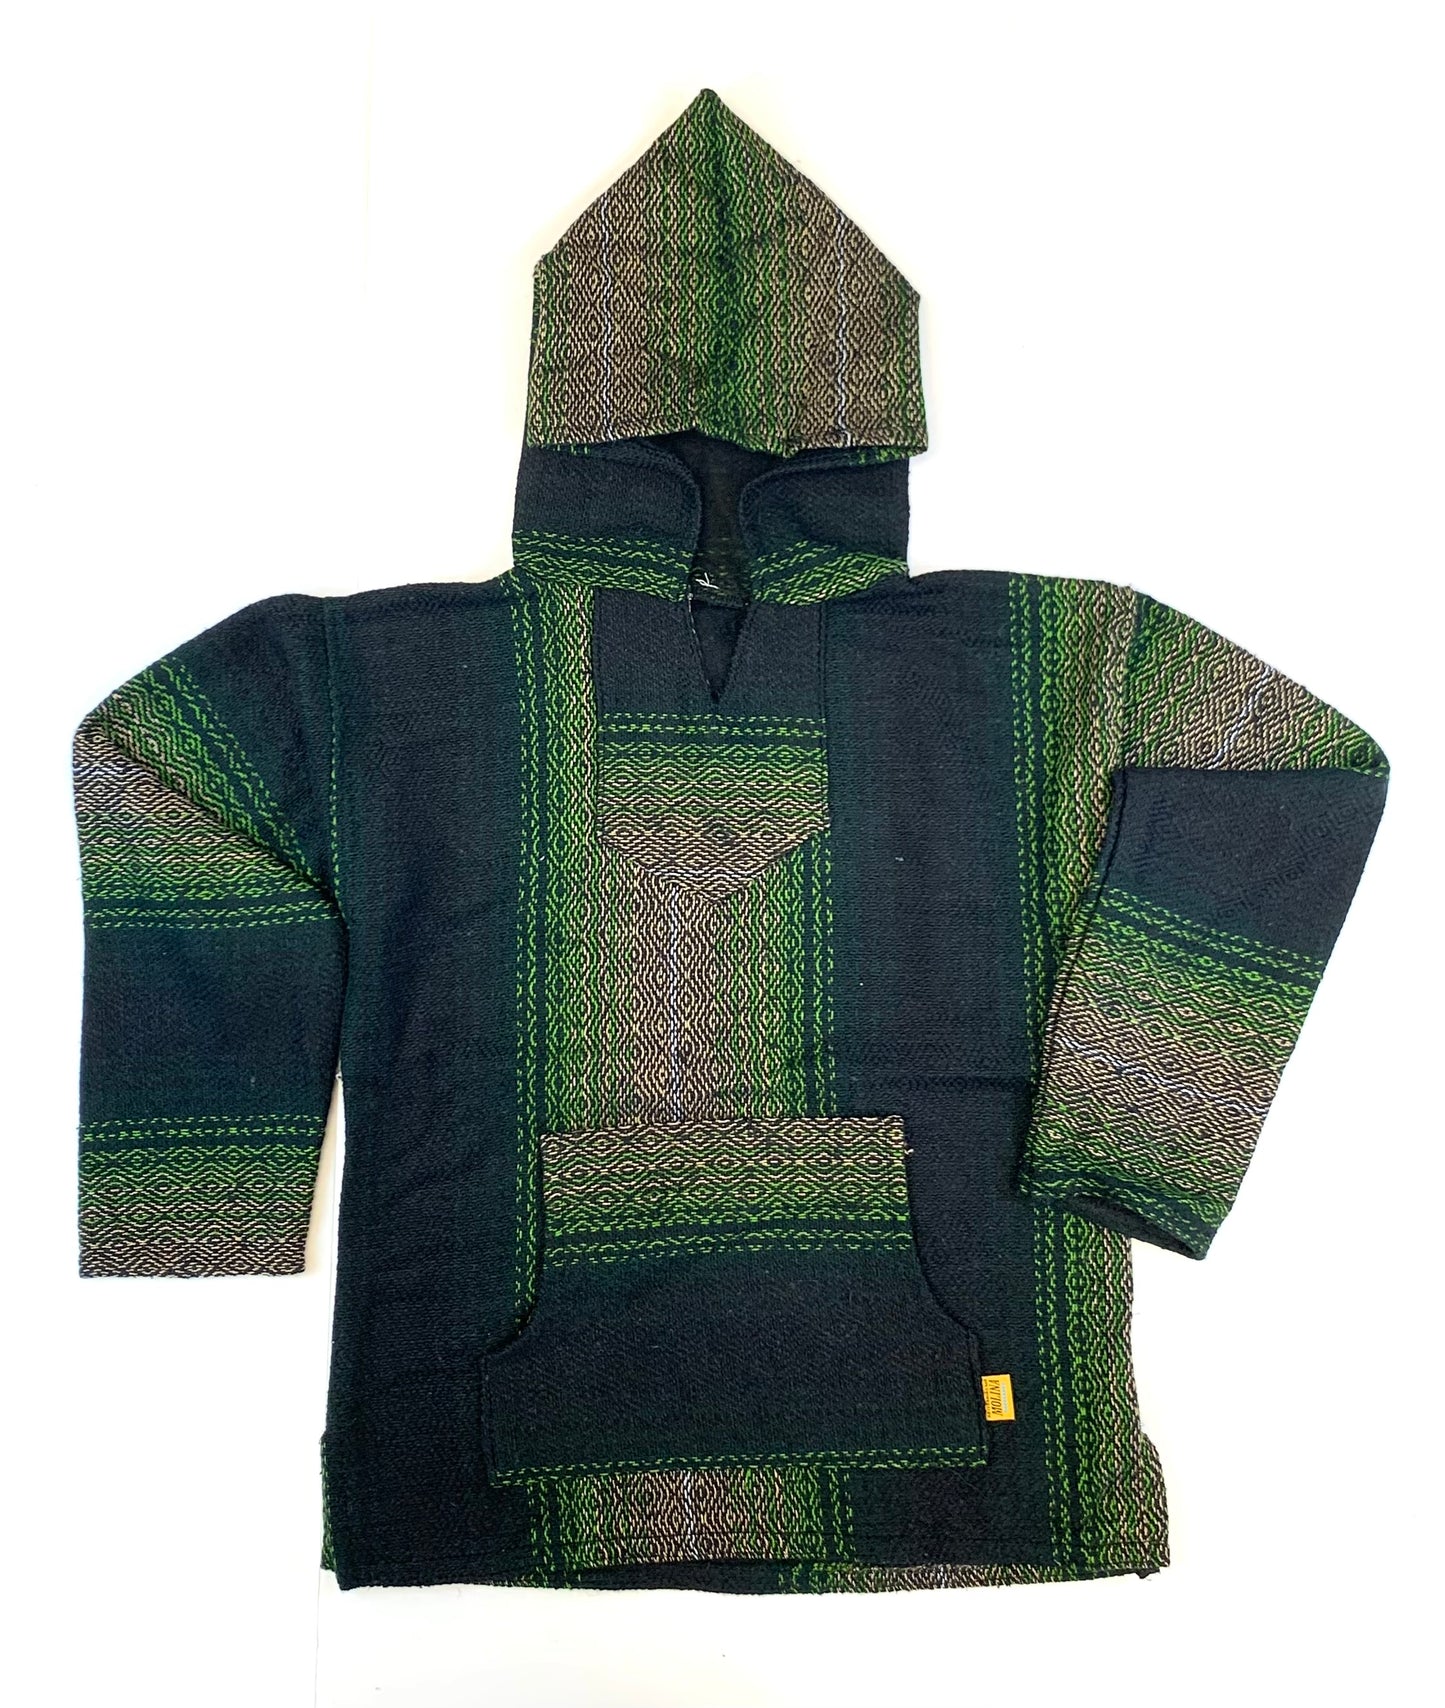 Limited Time Children's Large Mexican Baja Hoodies